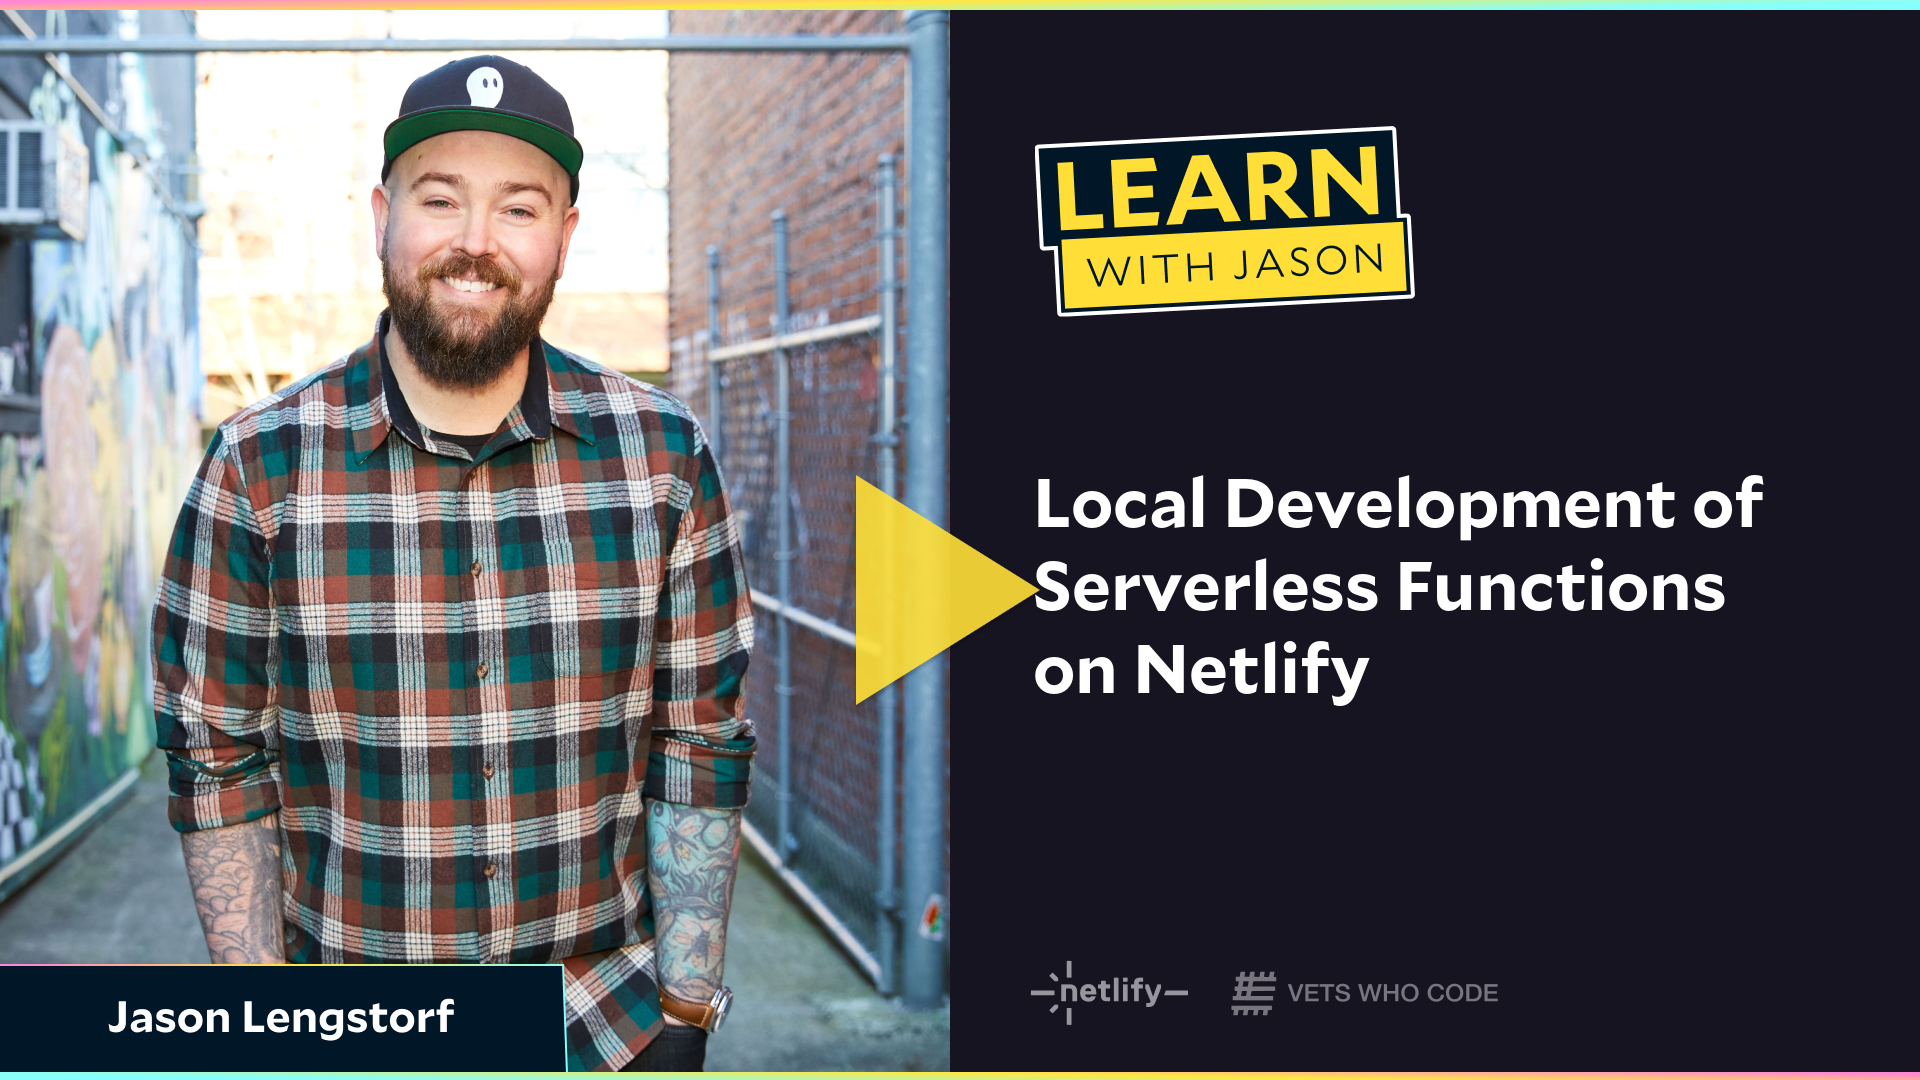 Local Development of Serverless Functions on Netlify (with Jason Lengstorf)